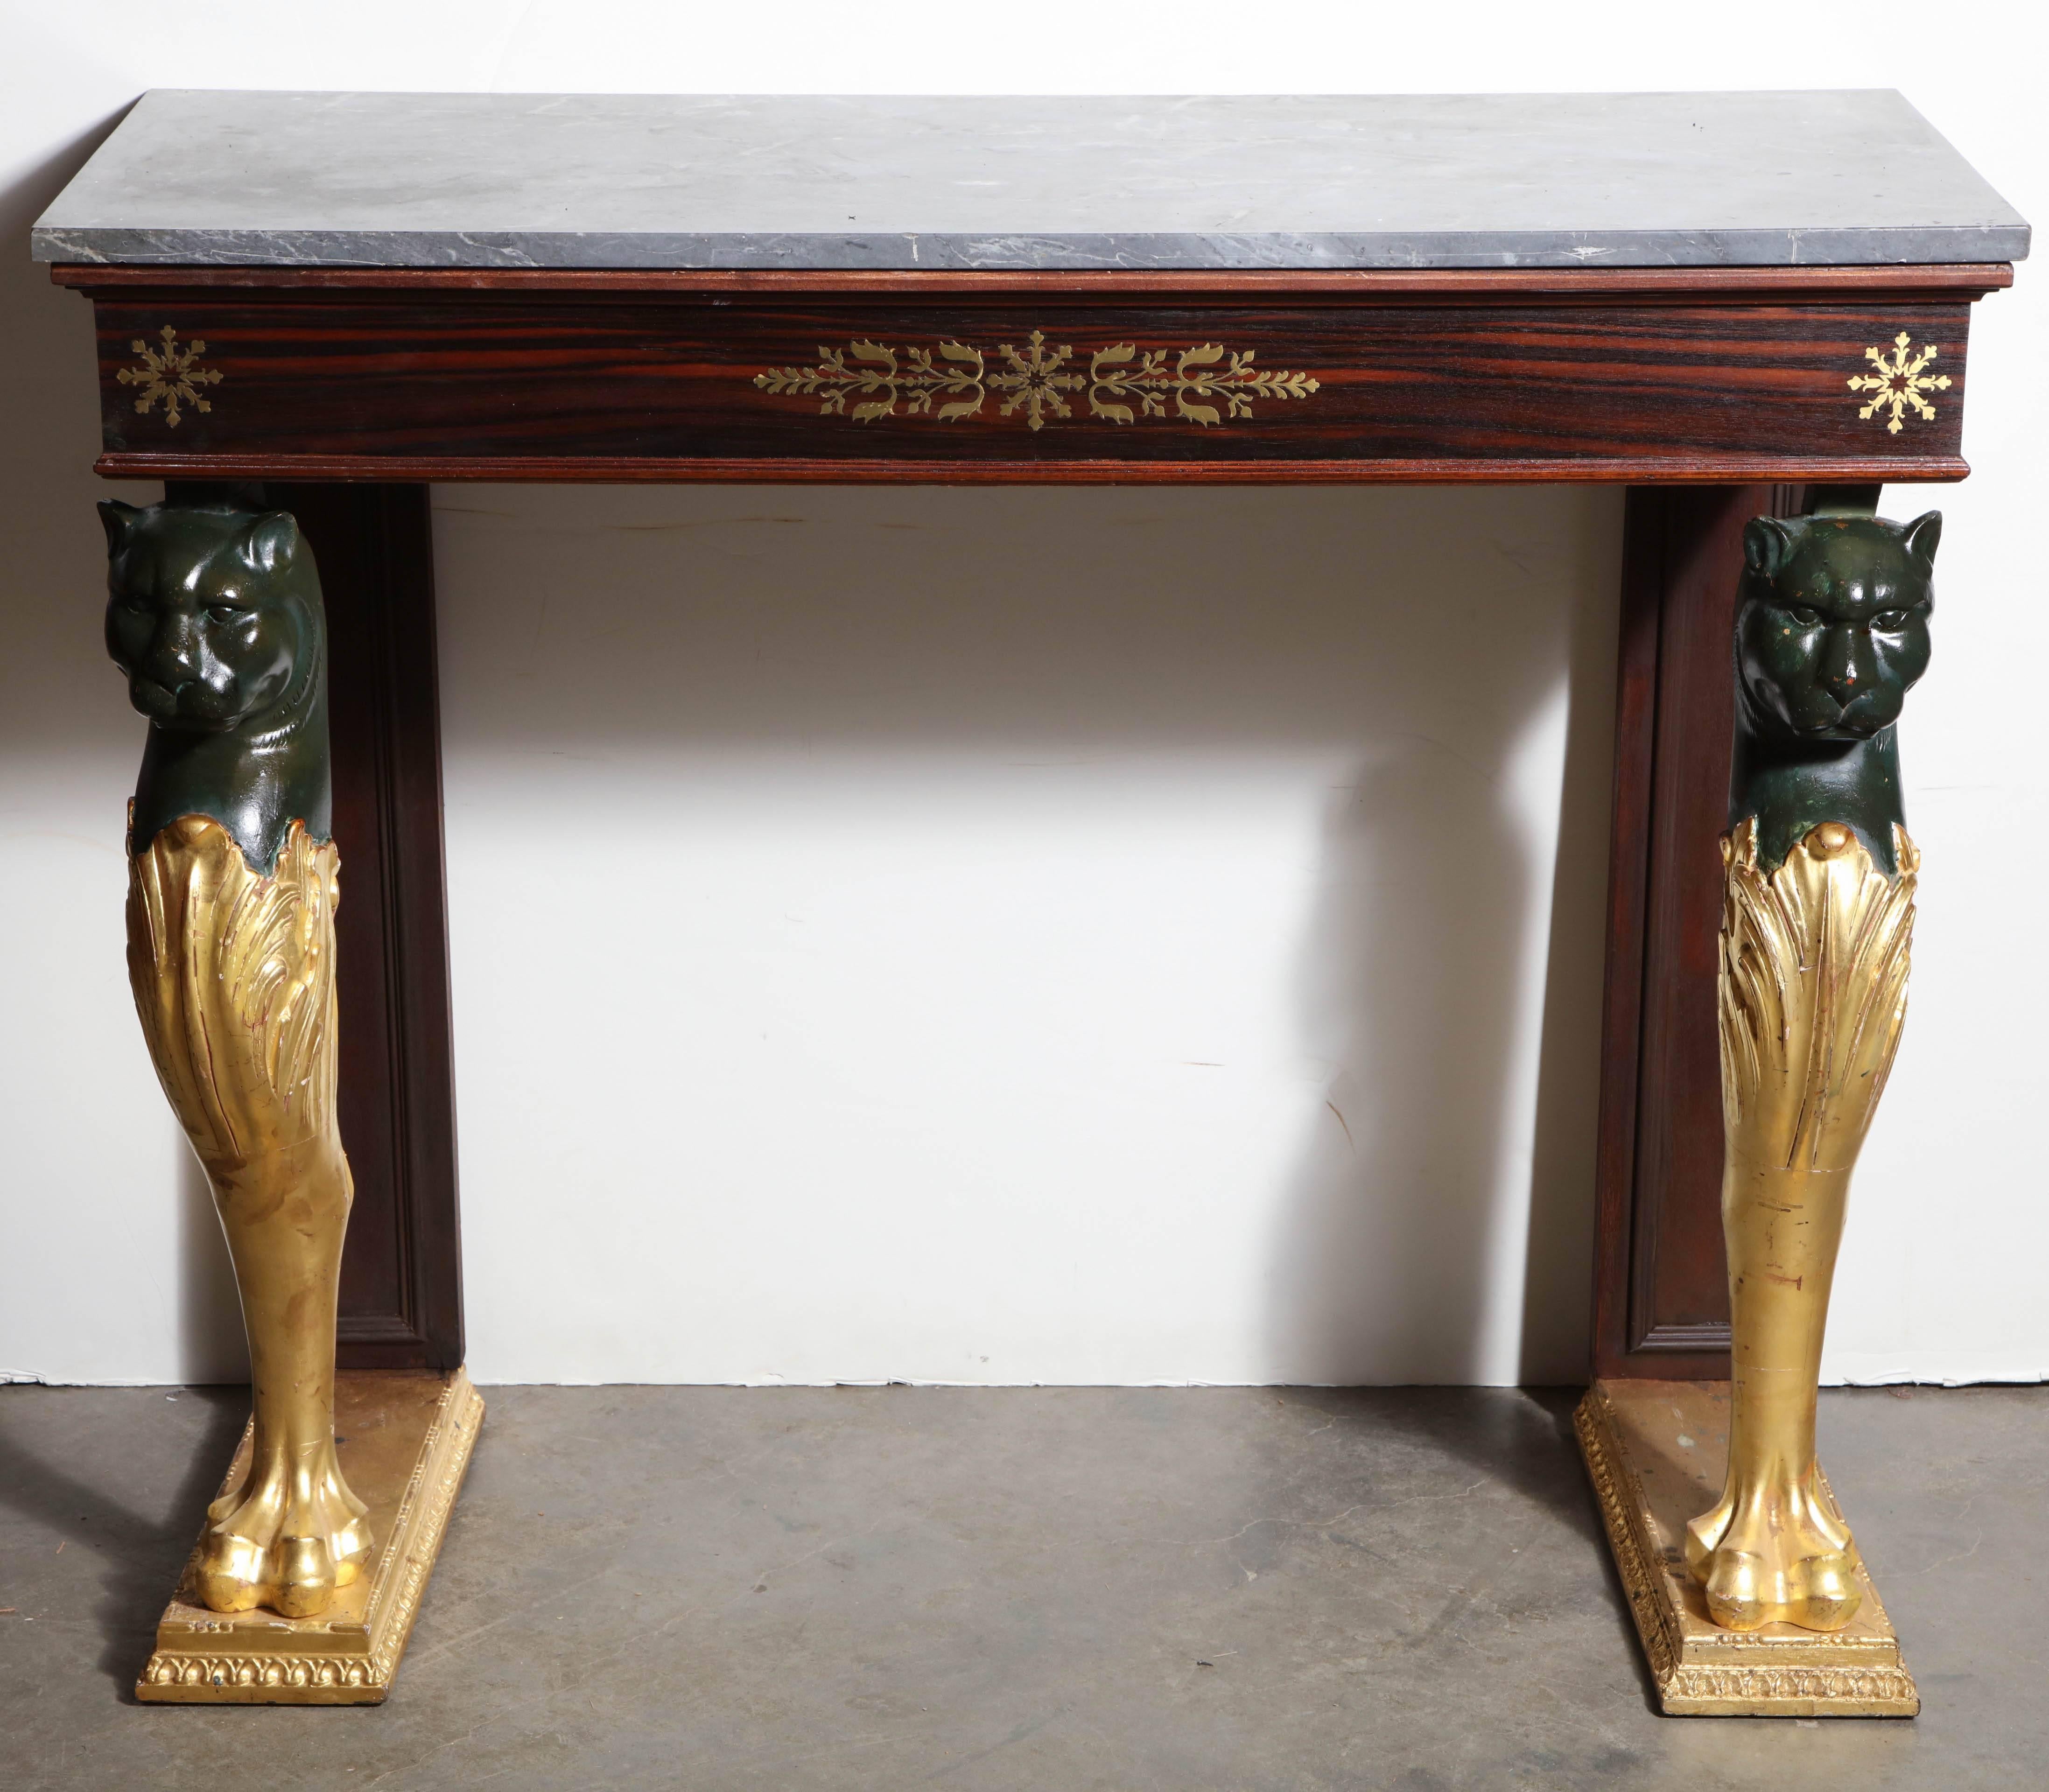 French Empire marble-top console pier table with rosewood and brass inlaid apron and gilded and painted lion form legs.